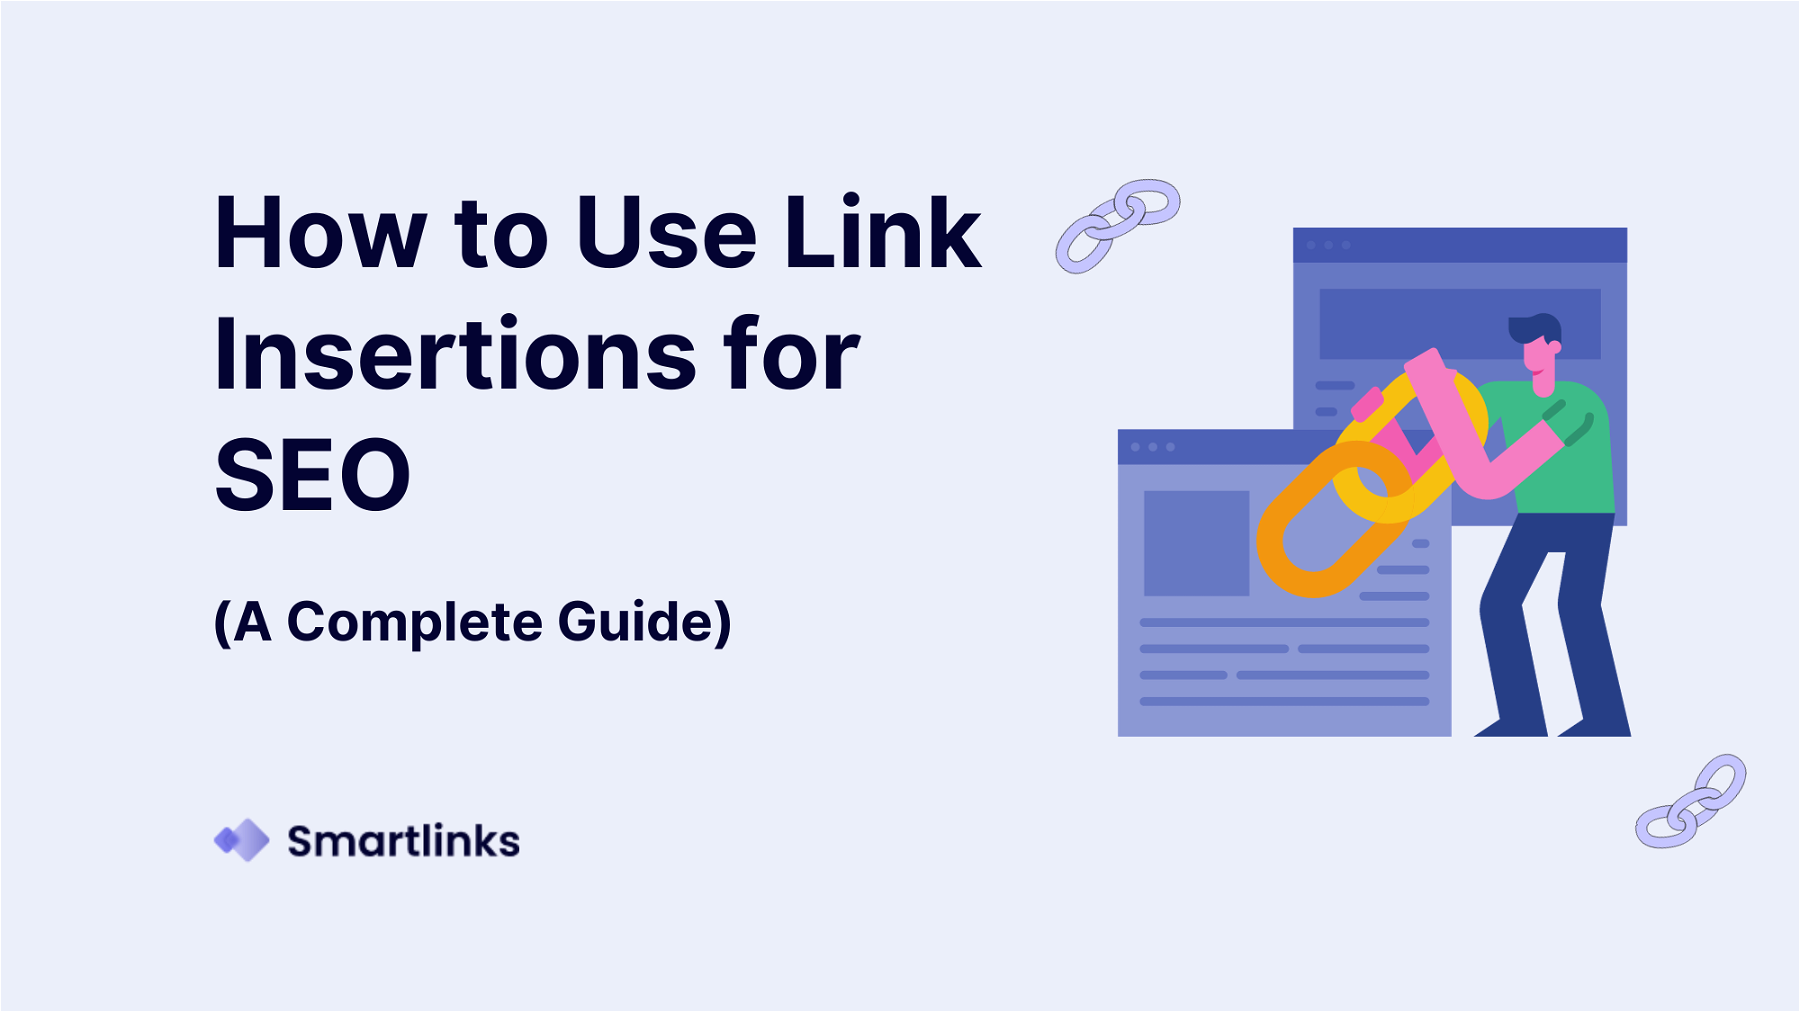 How to Use Link Insertions for SEO: A Complete Guide